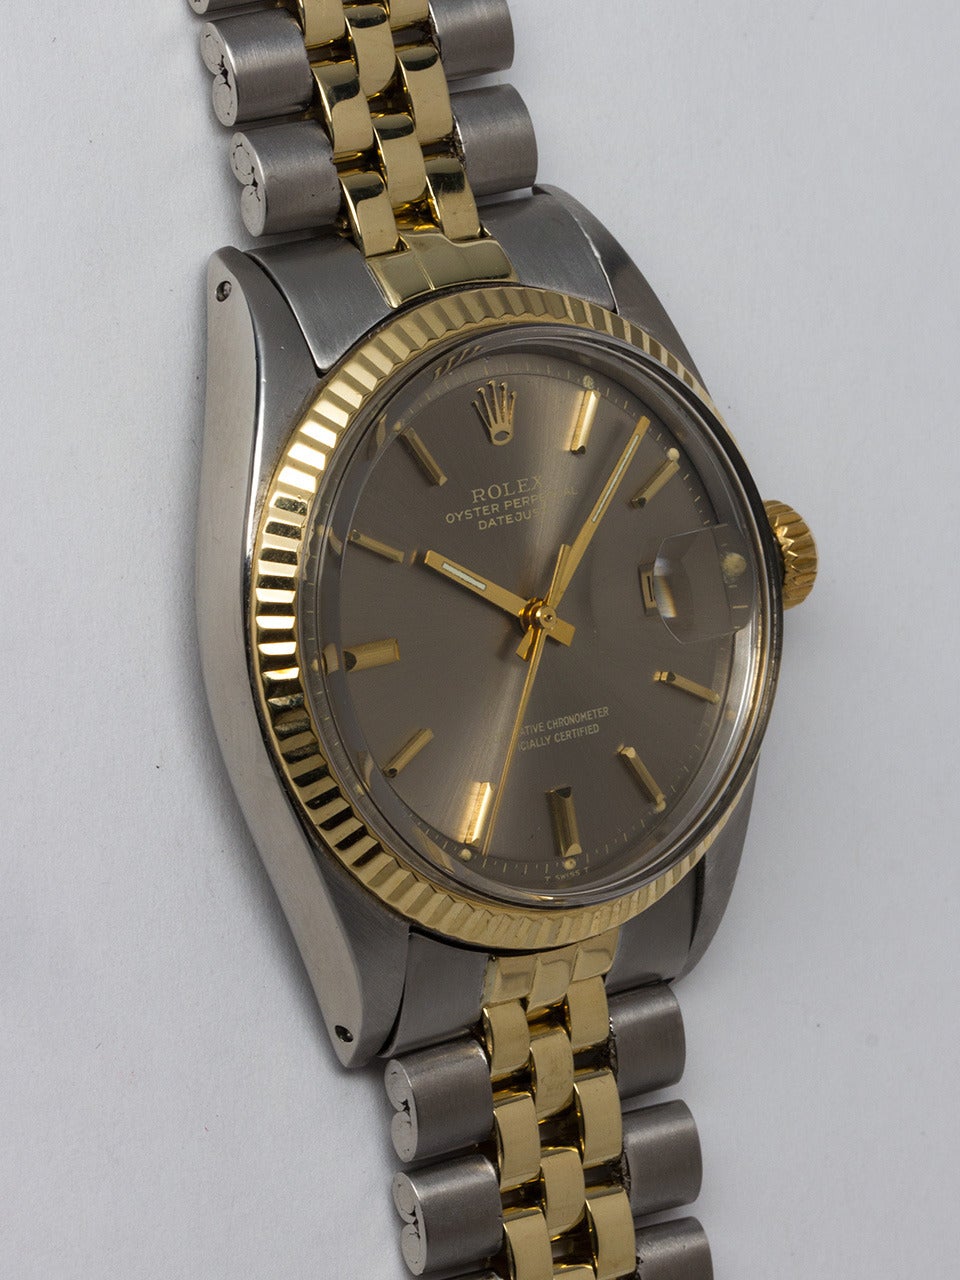 Rolex Stainless Steel and 14K Yellow Gold Datejust Wristwatch ref 1601 serial # 2.8 million circa 1971. 36mm full size man's model with 14K yellow gold fluted bezel and acrylic crystal. Very pleasing original grey pie pan dial with gold applied